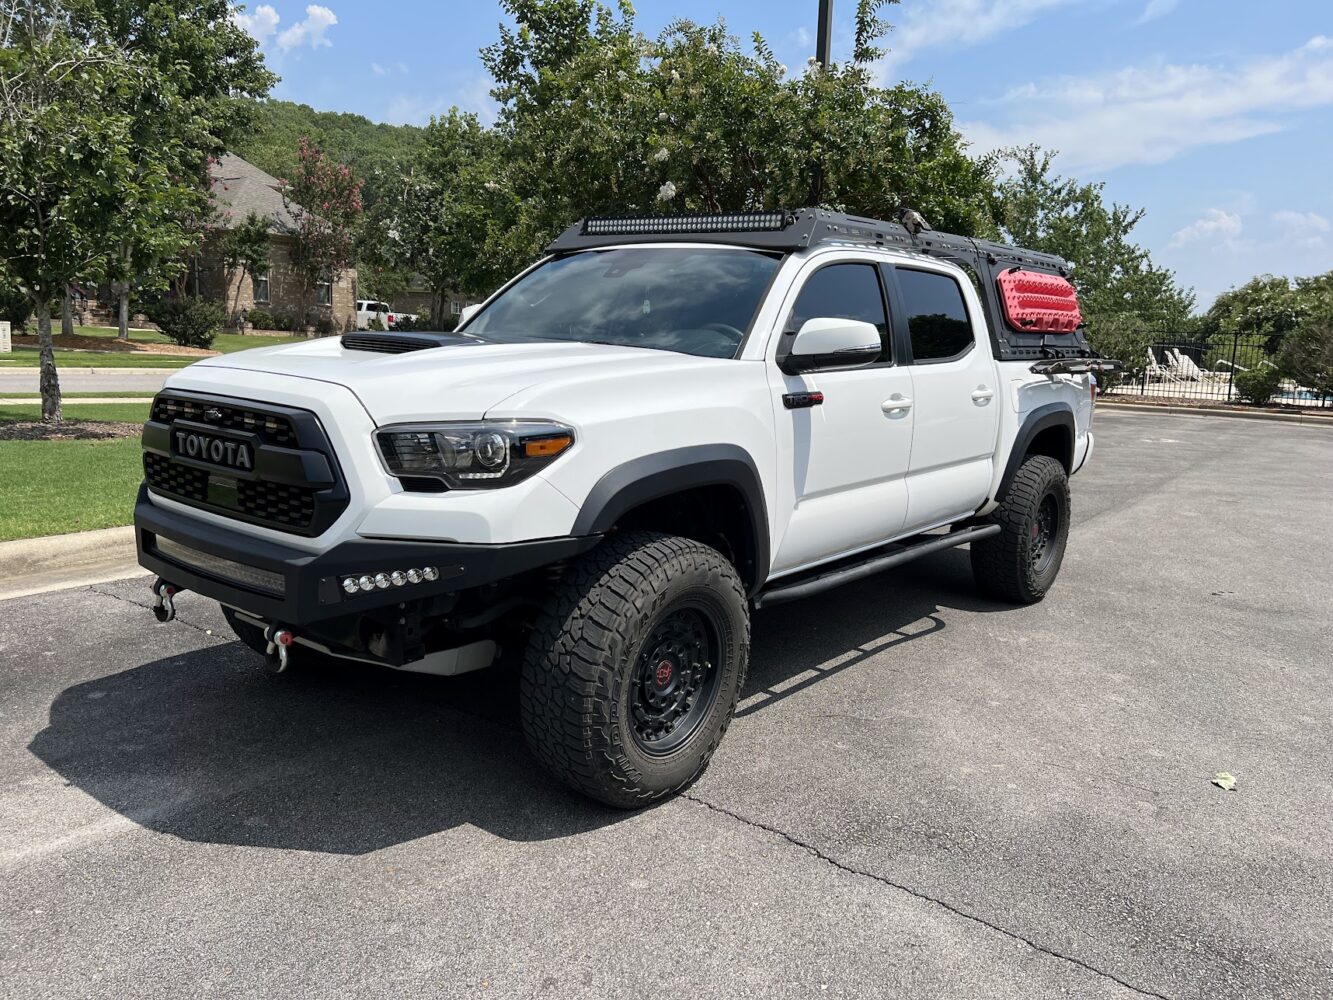 2018 Toyota Tacoma TRD Pro :: Classifieds - Expedition Portal